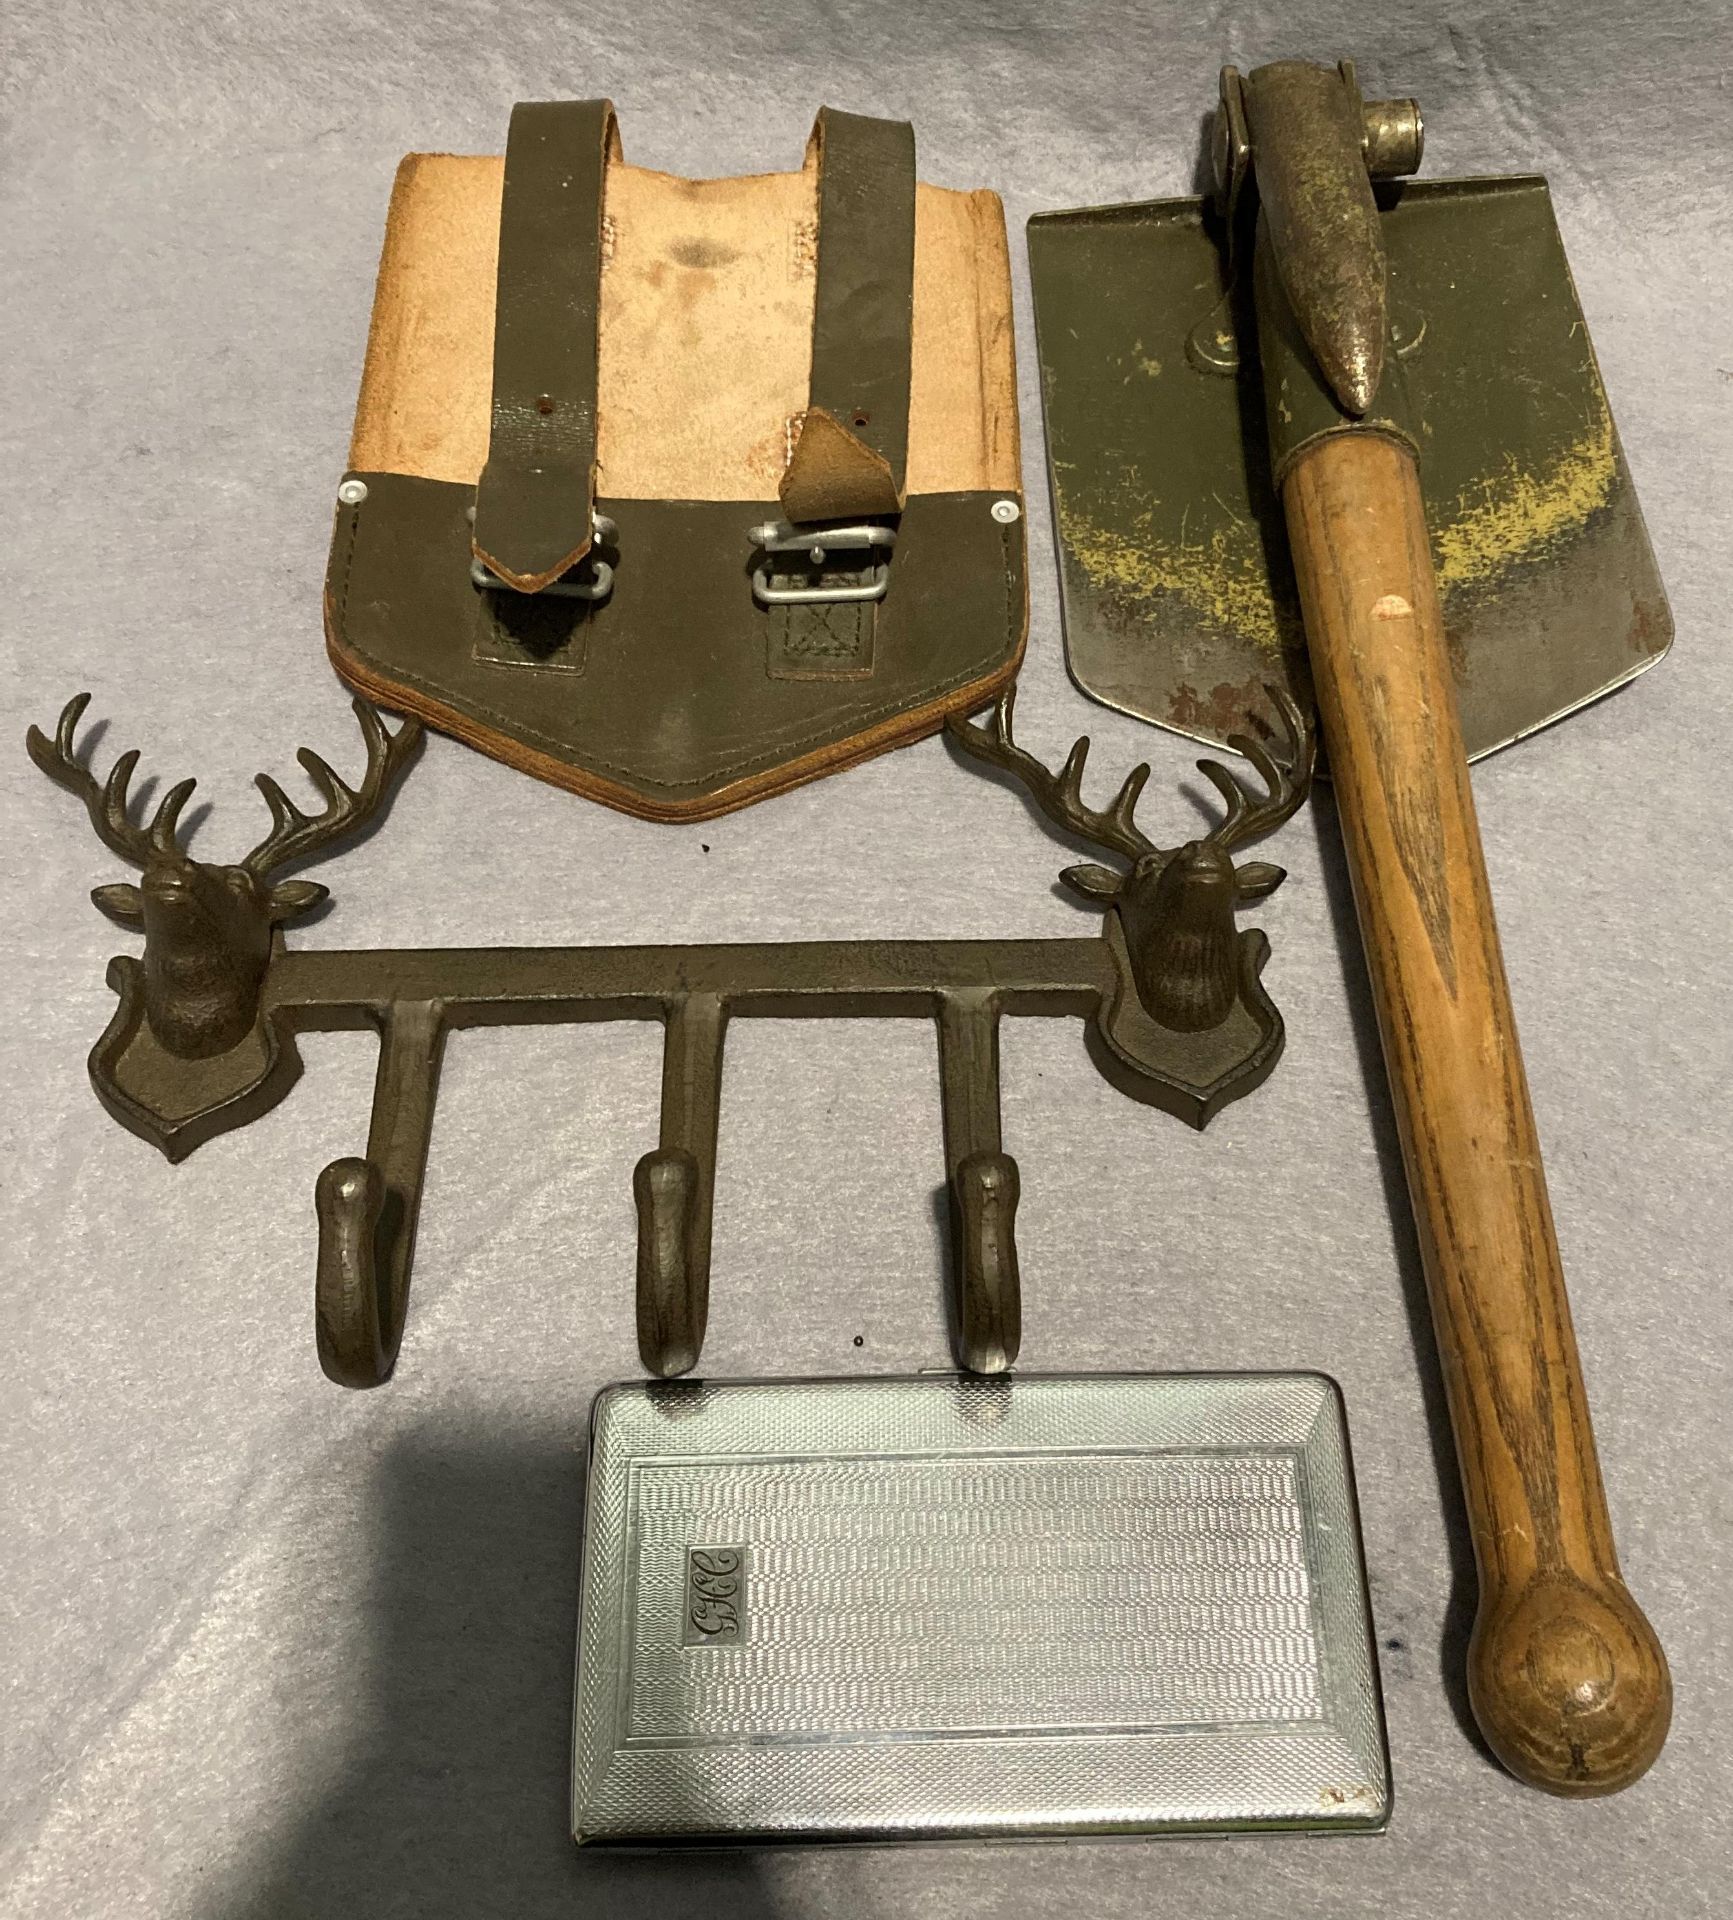 1964 German entrenching tool folding with wooden handle and leather sleeve,